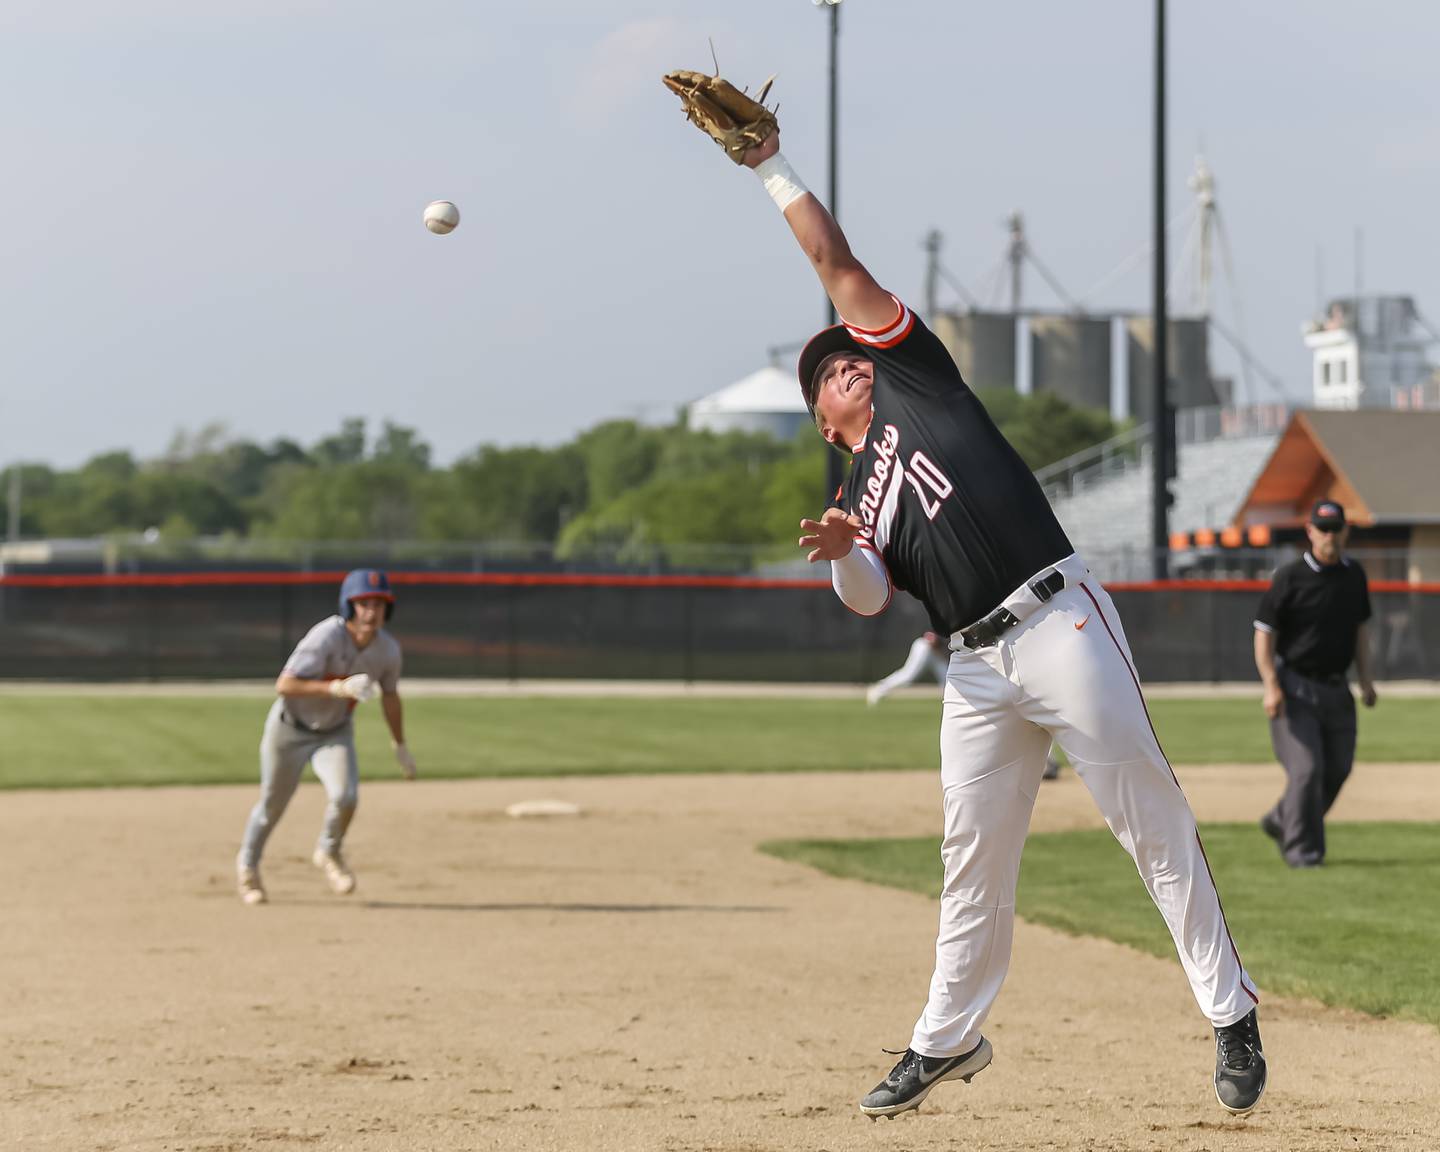 Minooka's Ivan Dahlberg (20) leaps for a ball that gets through for a hit during baseball game between Minooka vs Oswego May 24, 2021.